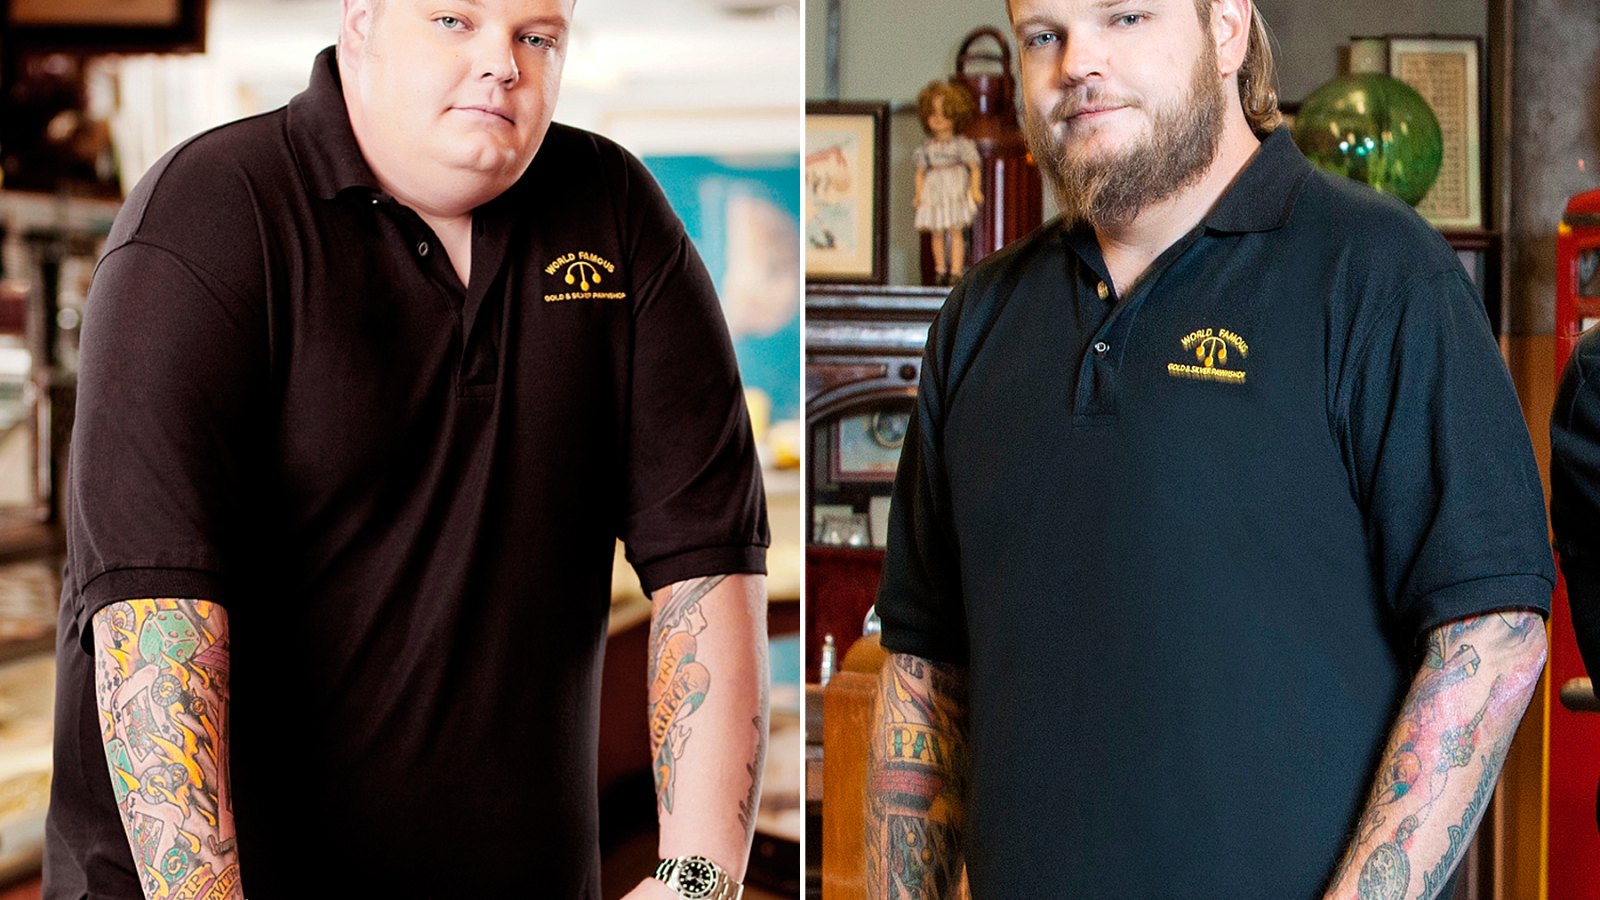 Pawn Stars' Corey Harrison before and after 200 lb weight loss